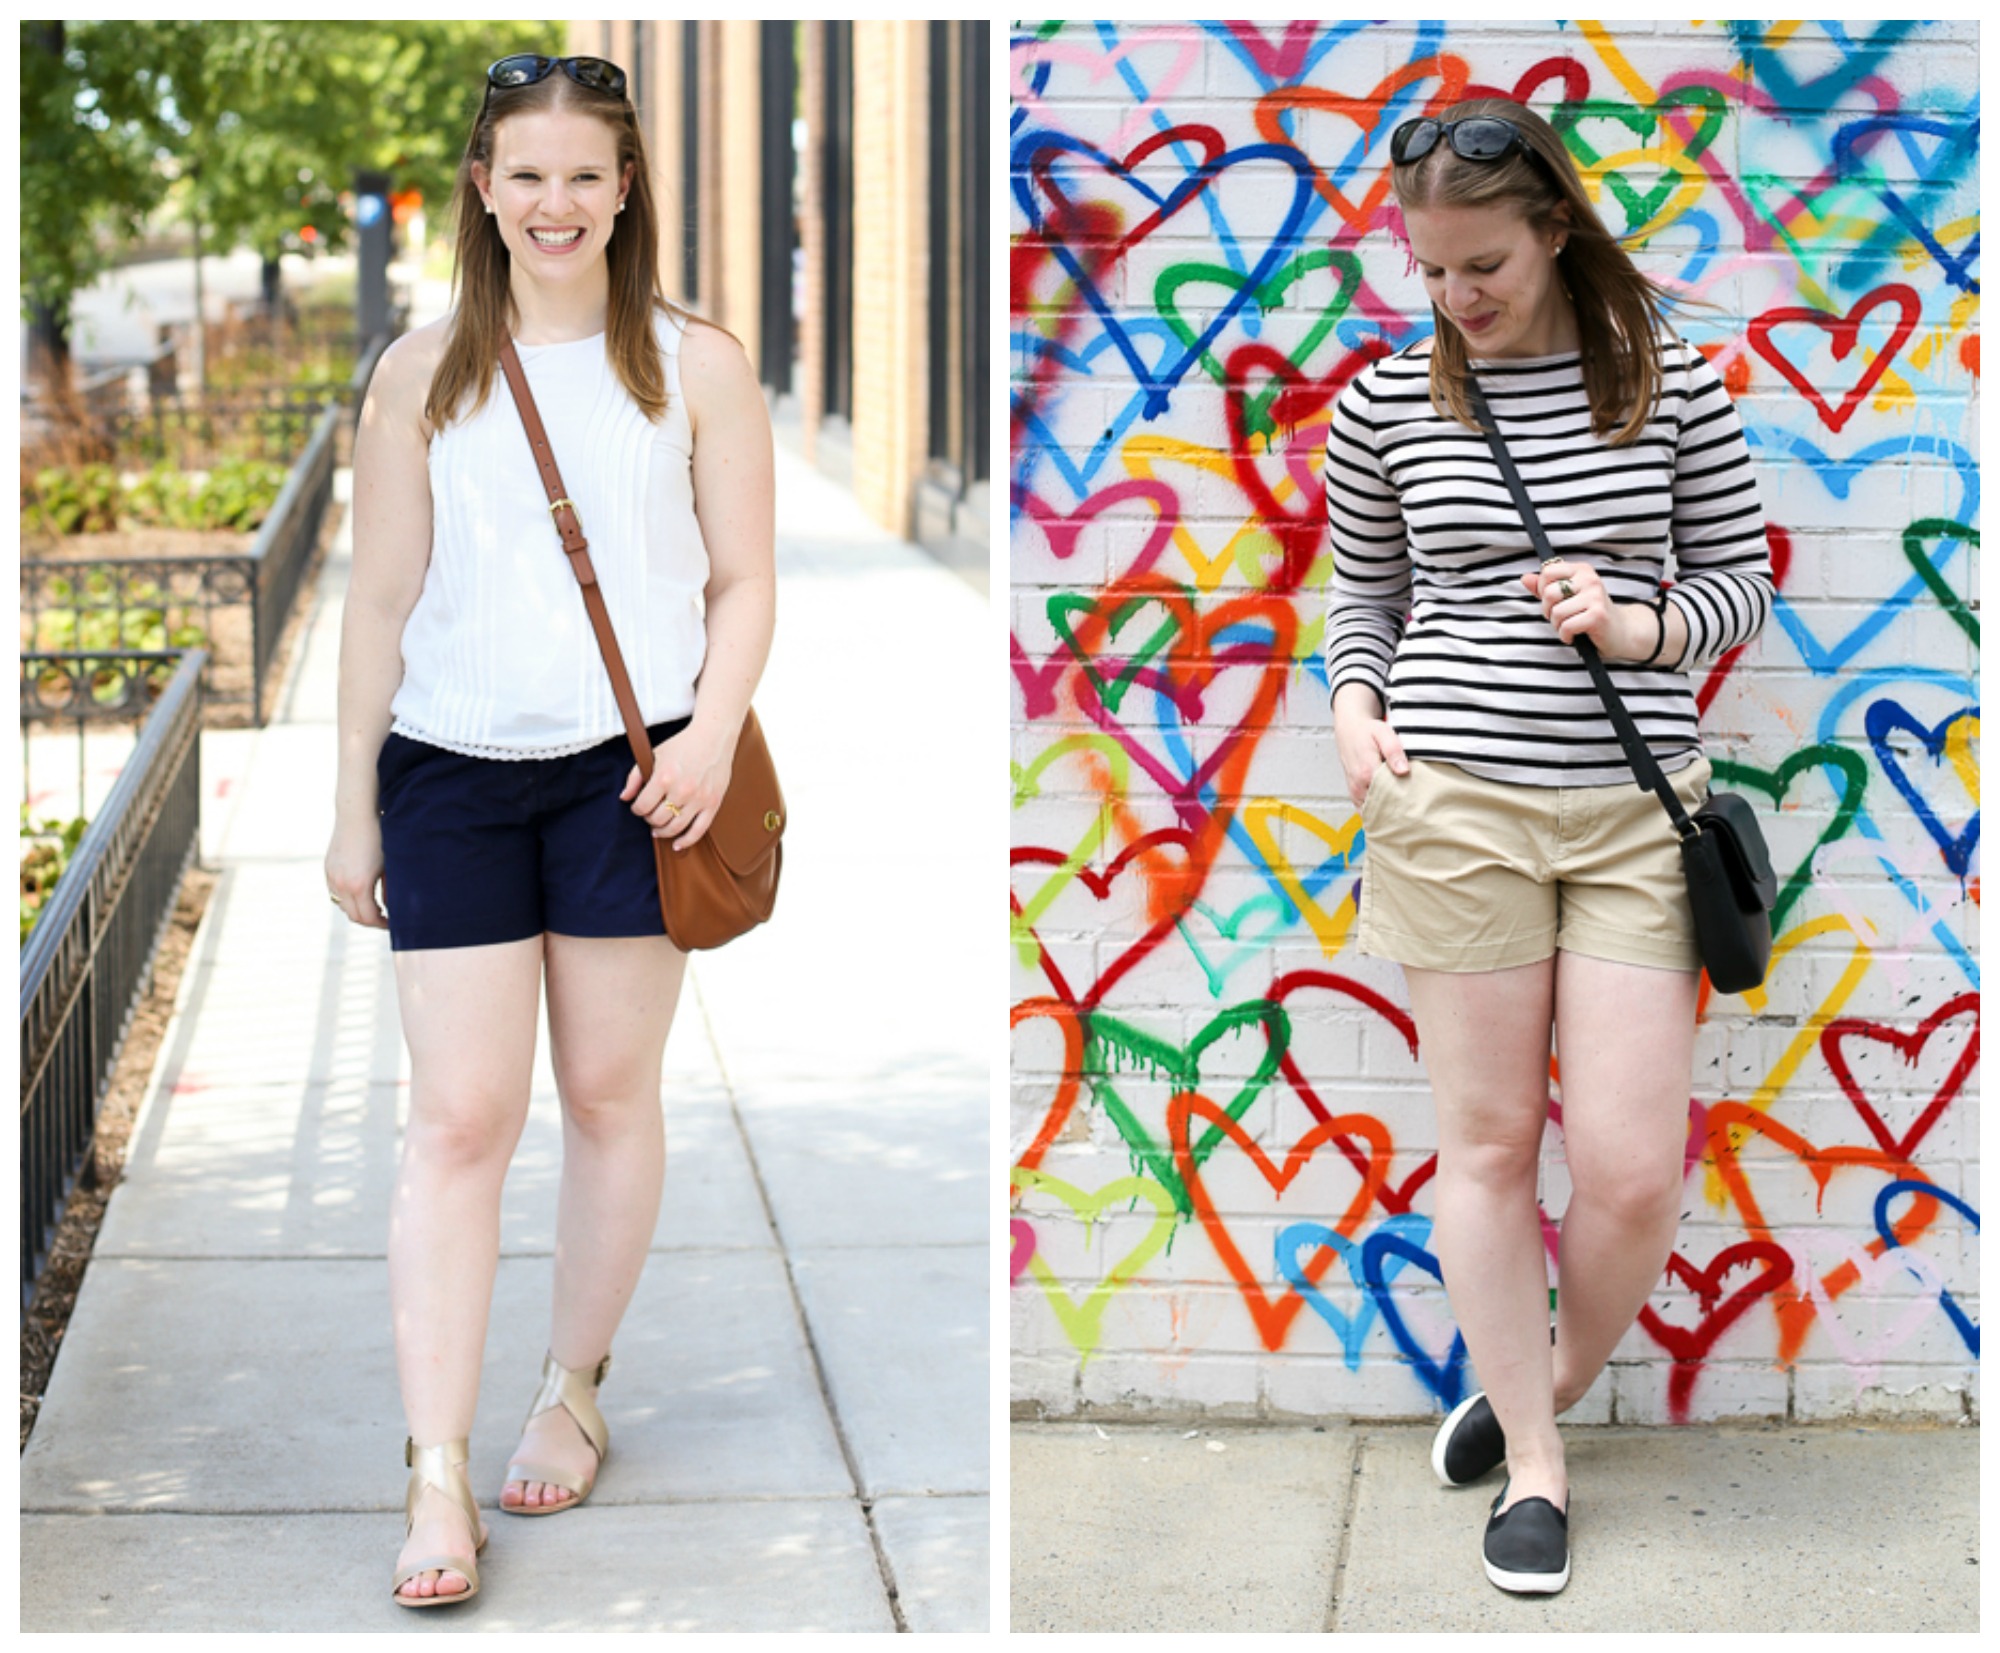 dc female style blogger wearing navy shorts, woman wearing khaki shorts and a striped top